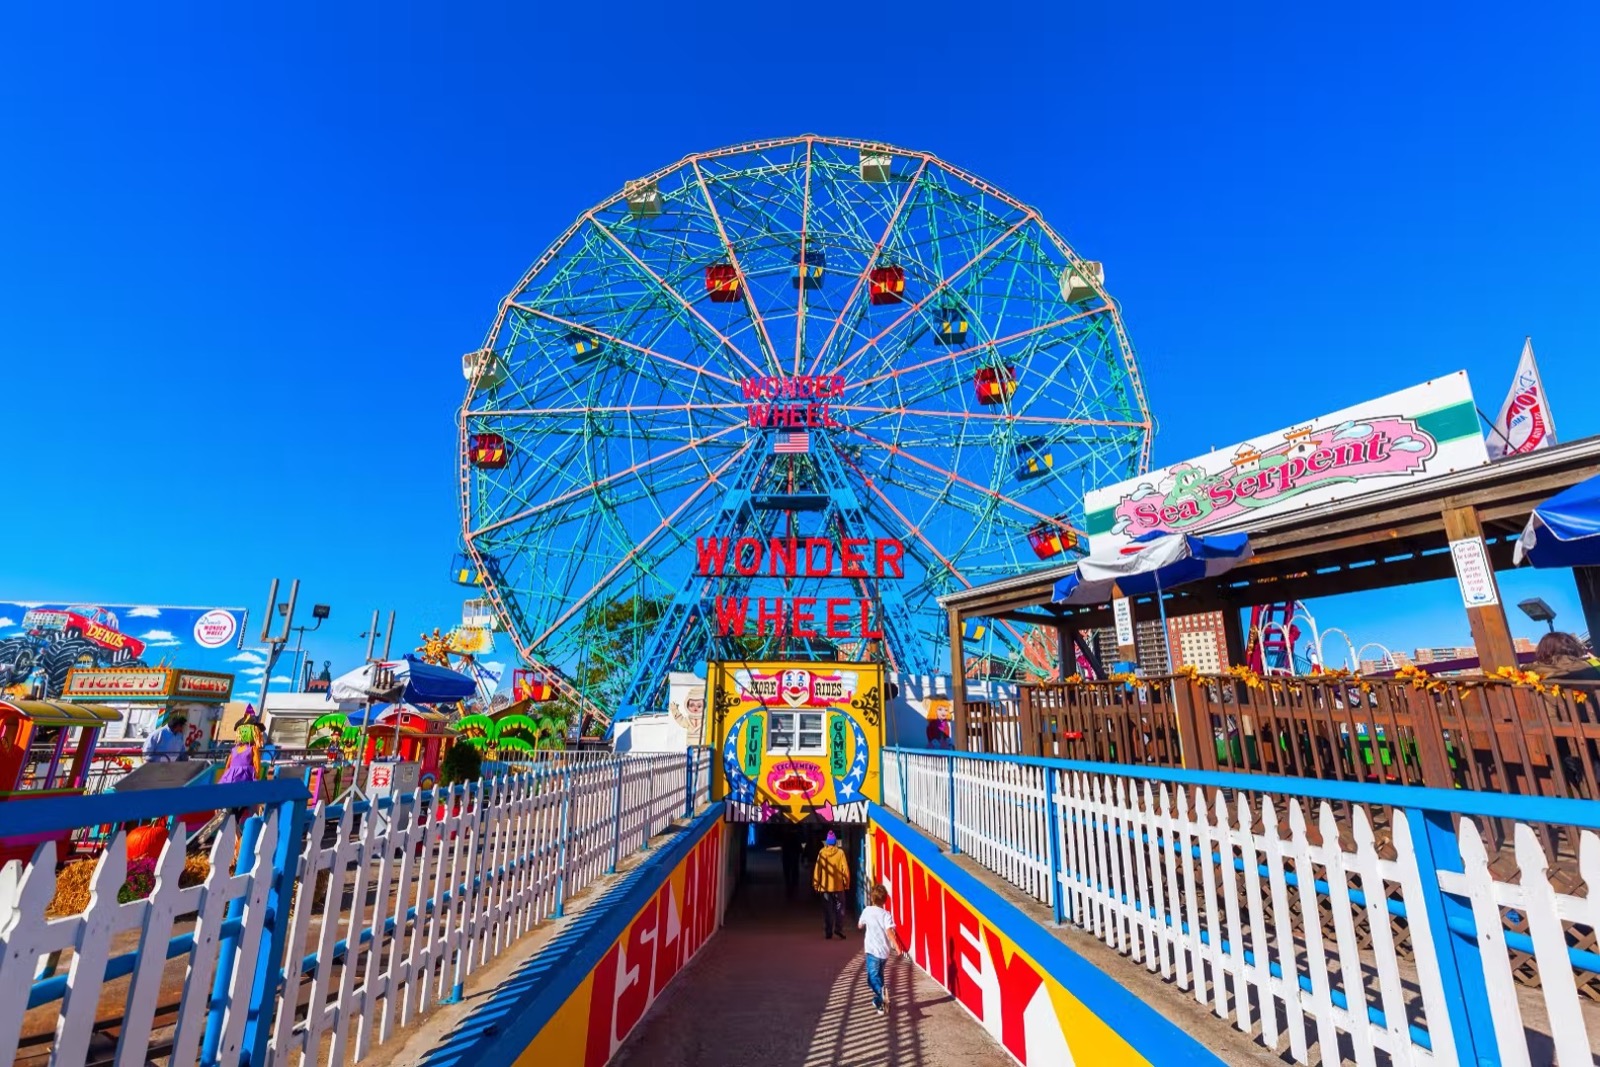 Take a Trip to New York City to Find Out Where You’ll Meet Your Soulmate Taking a trip to Coney Island